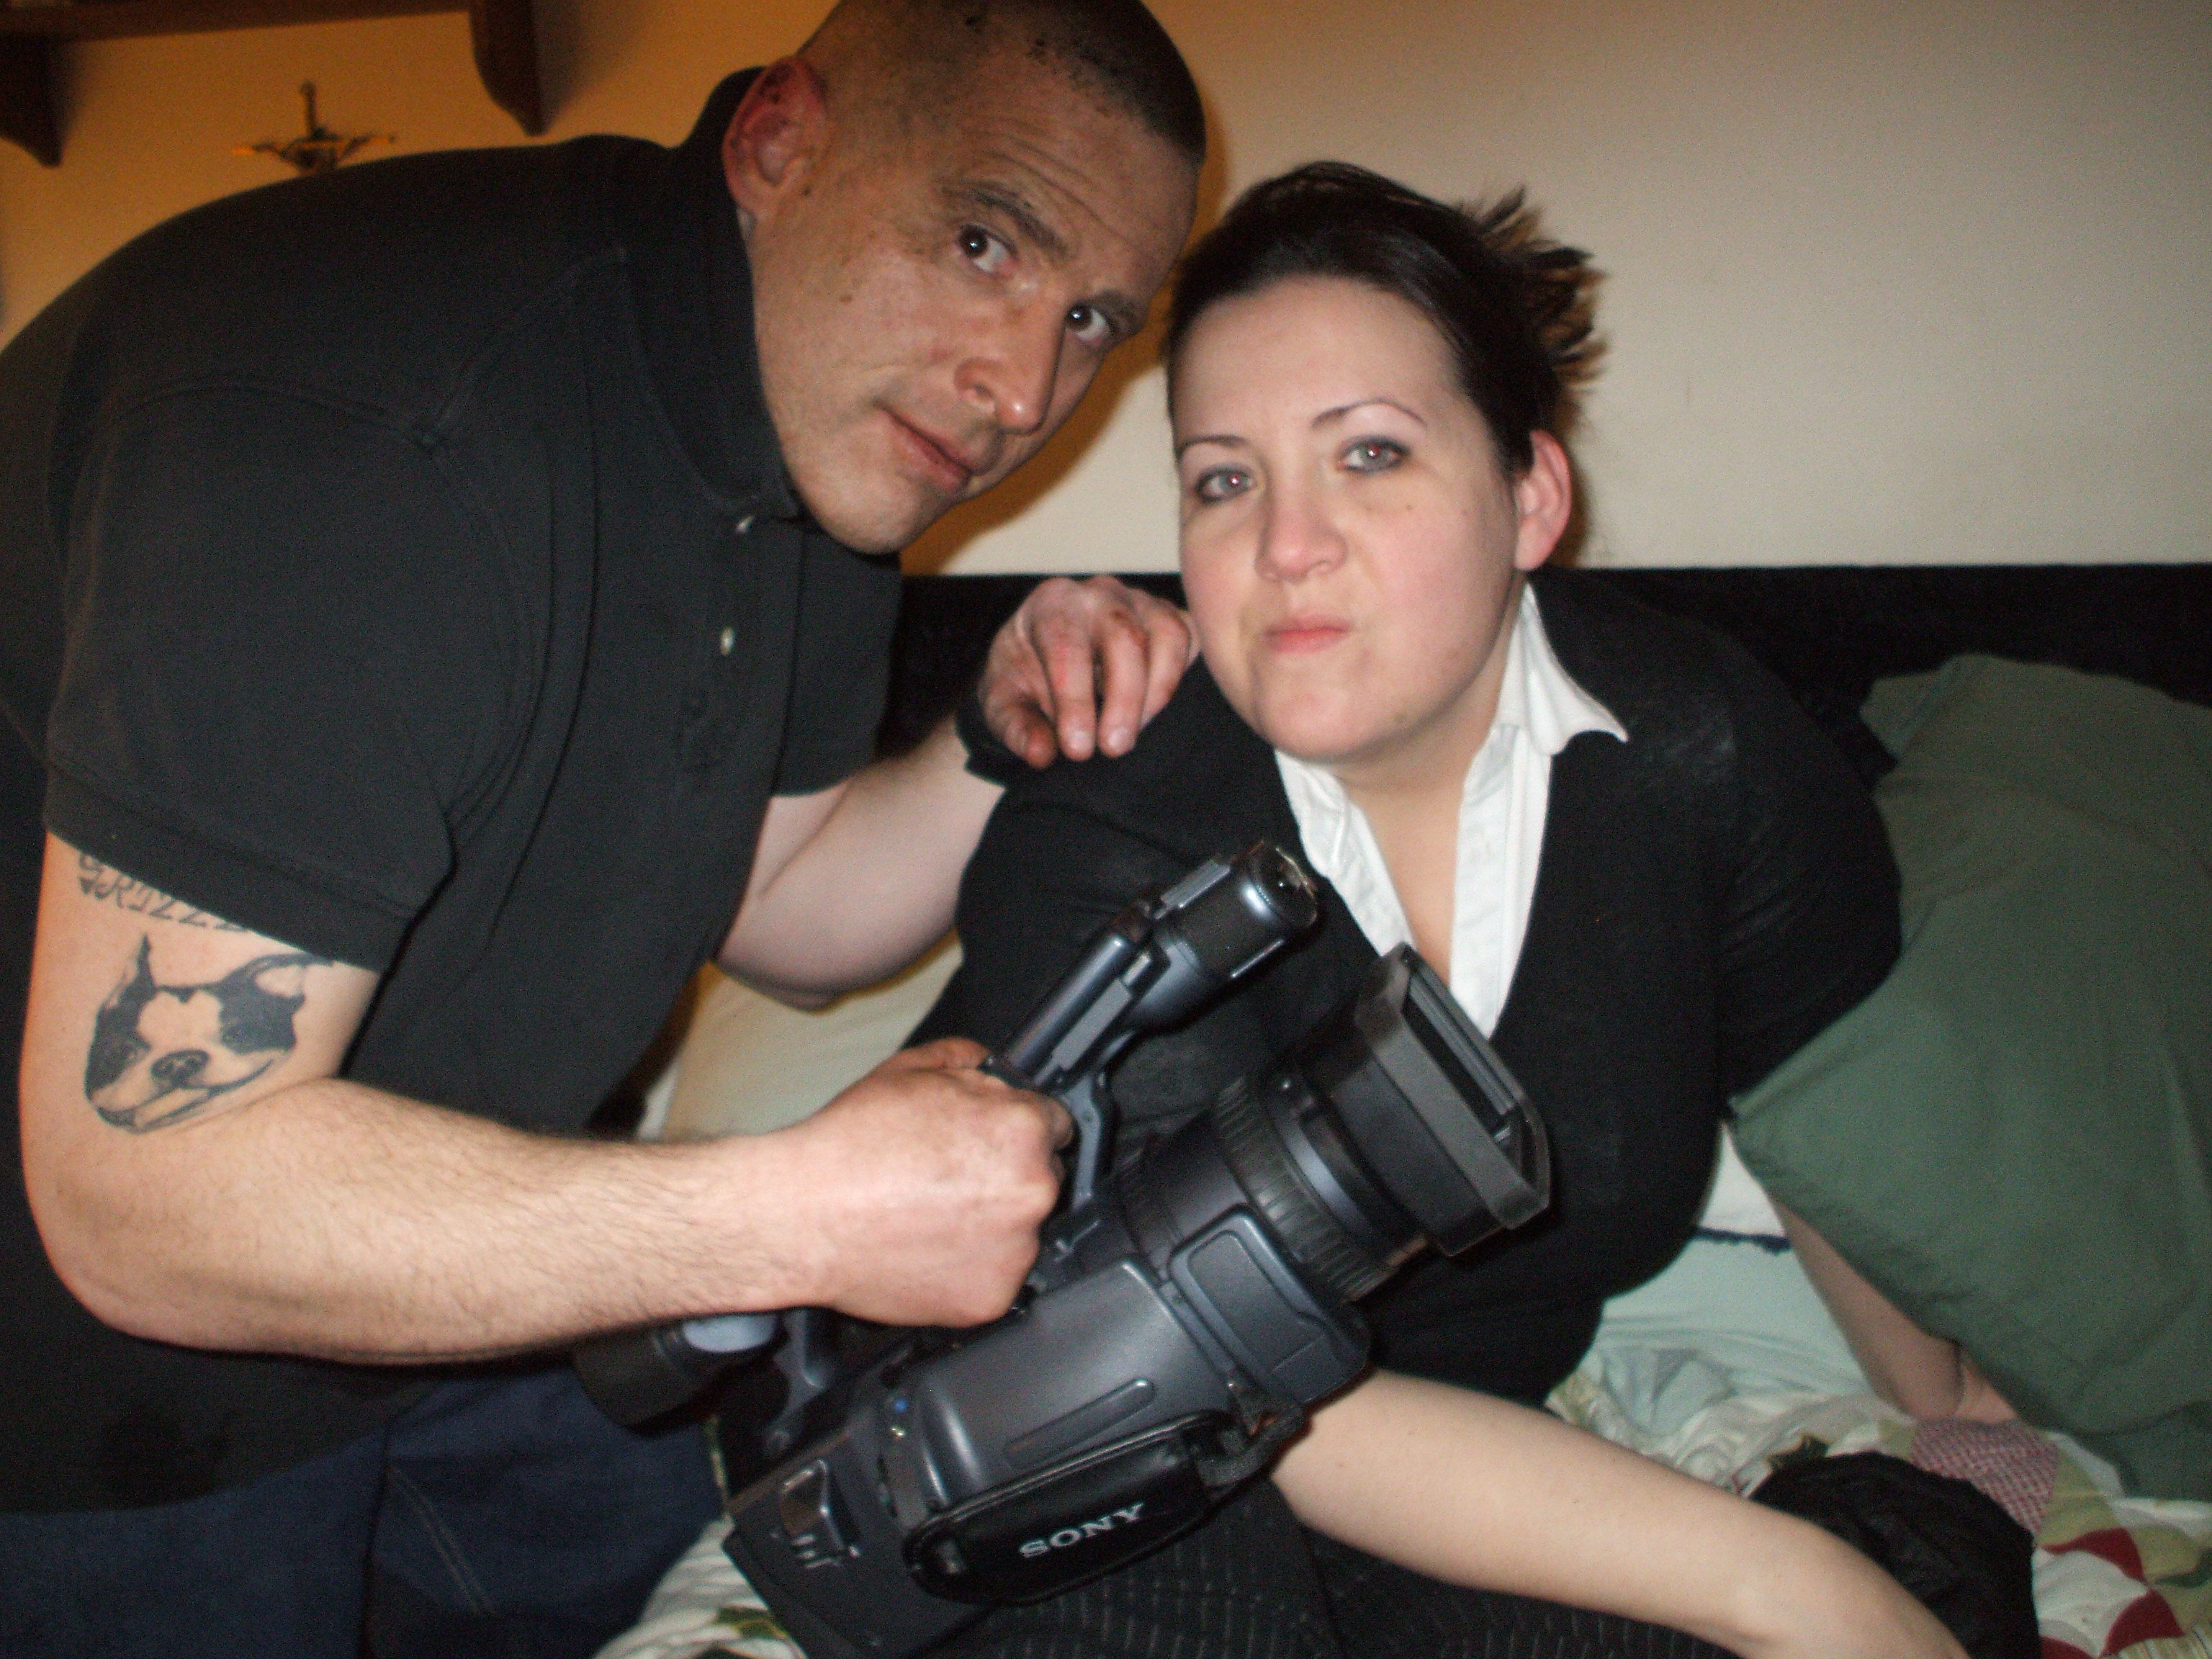 Stephen Cook and Heather Cook during the filming of Aim Point Shoot (2013)